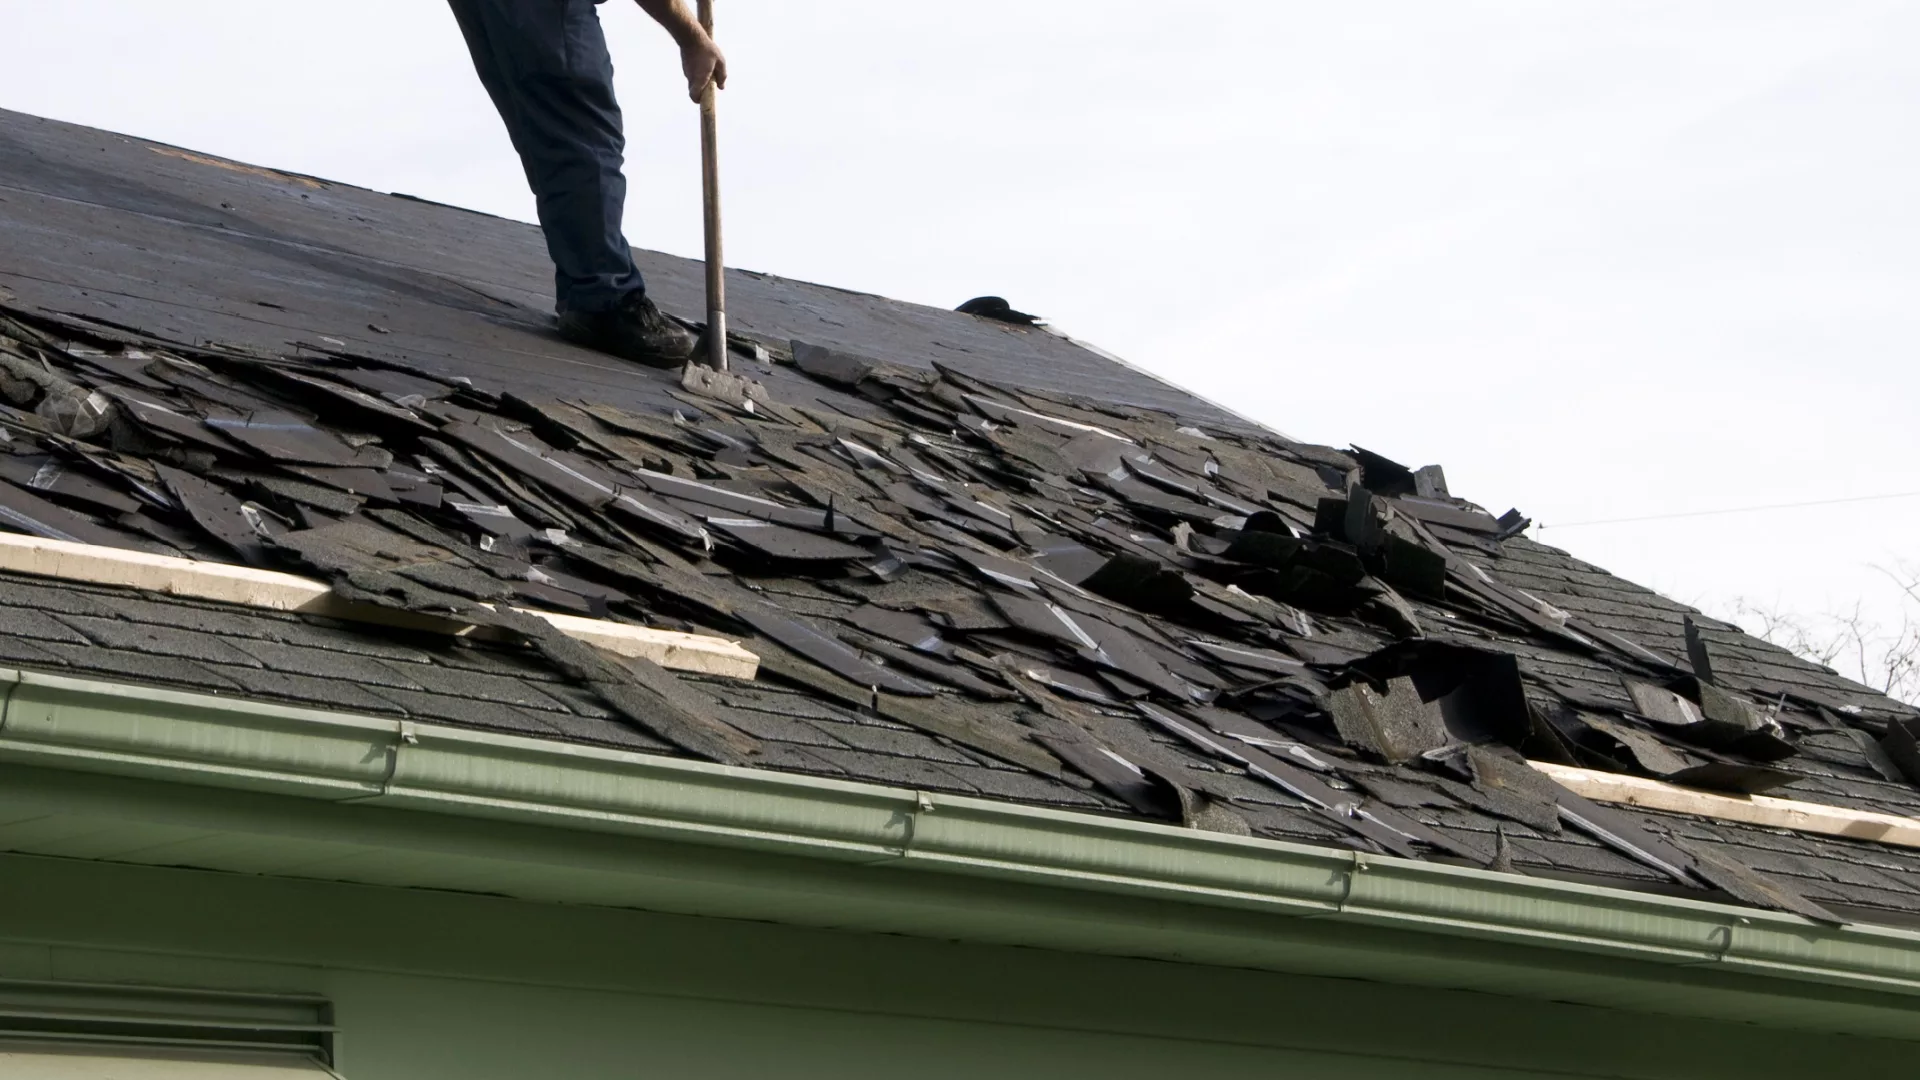 Finding the Best Warranties for Architectural Shingles